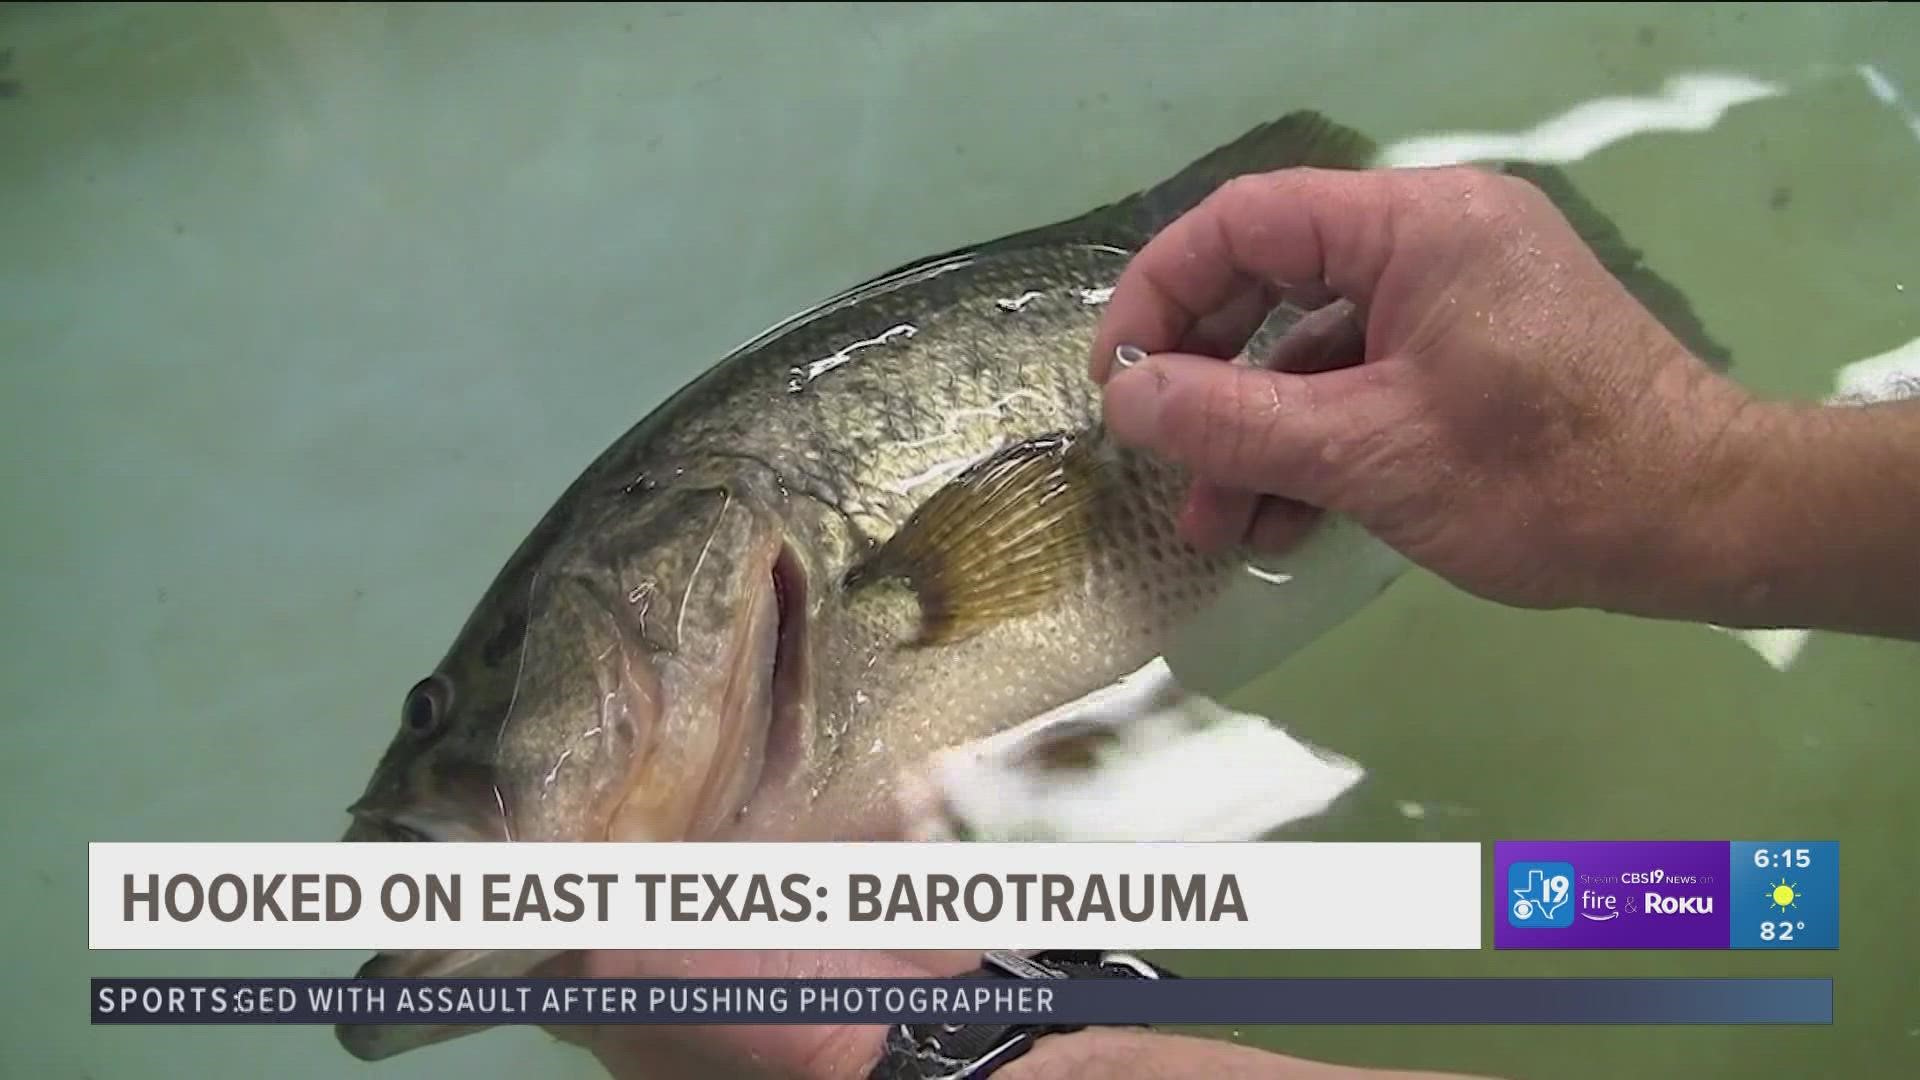 For more Hooked On East Texas stories, visit cbs19.tv/hooked-on-east-texas